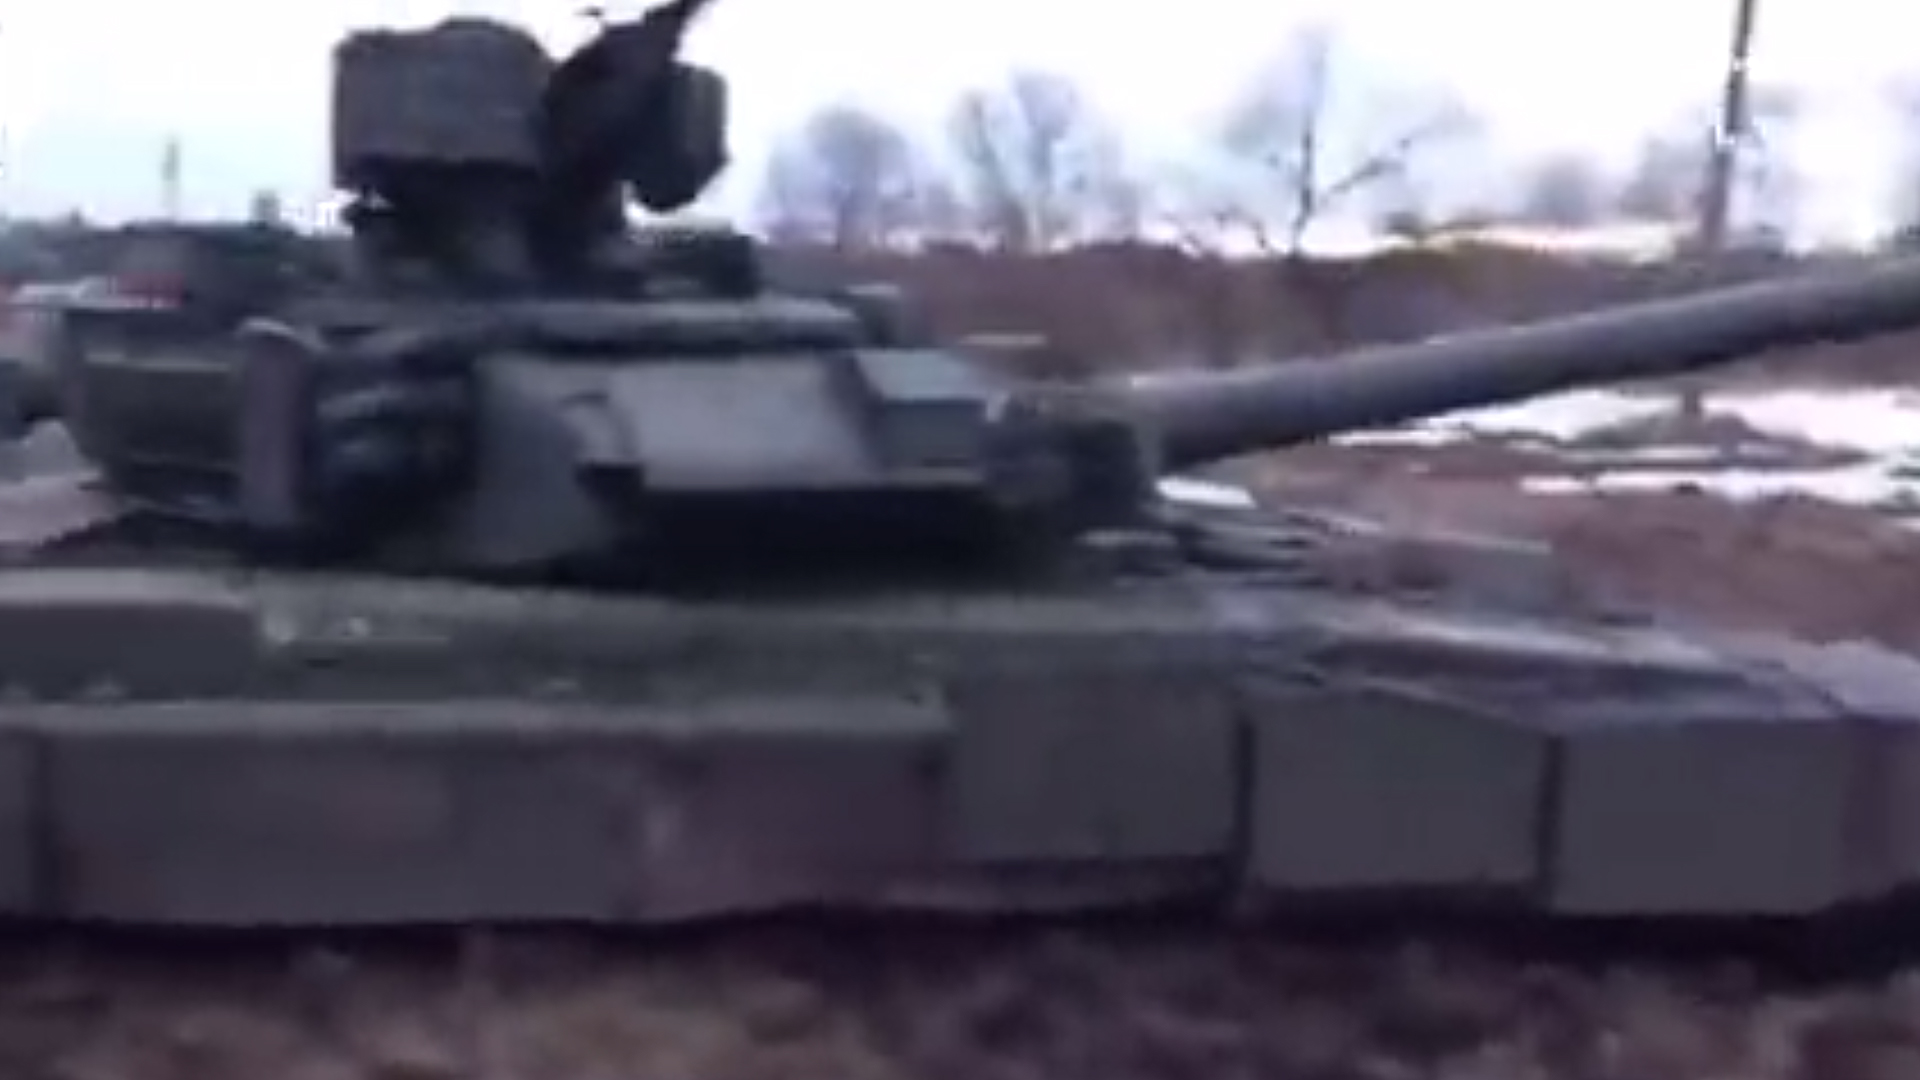 Russian tanks are being defeated by Ukraine's muddy terrain